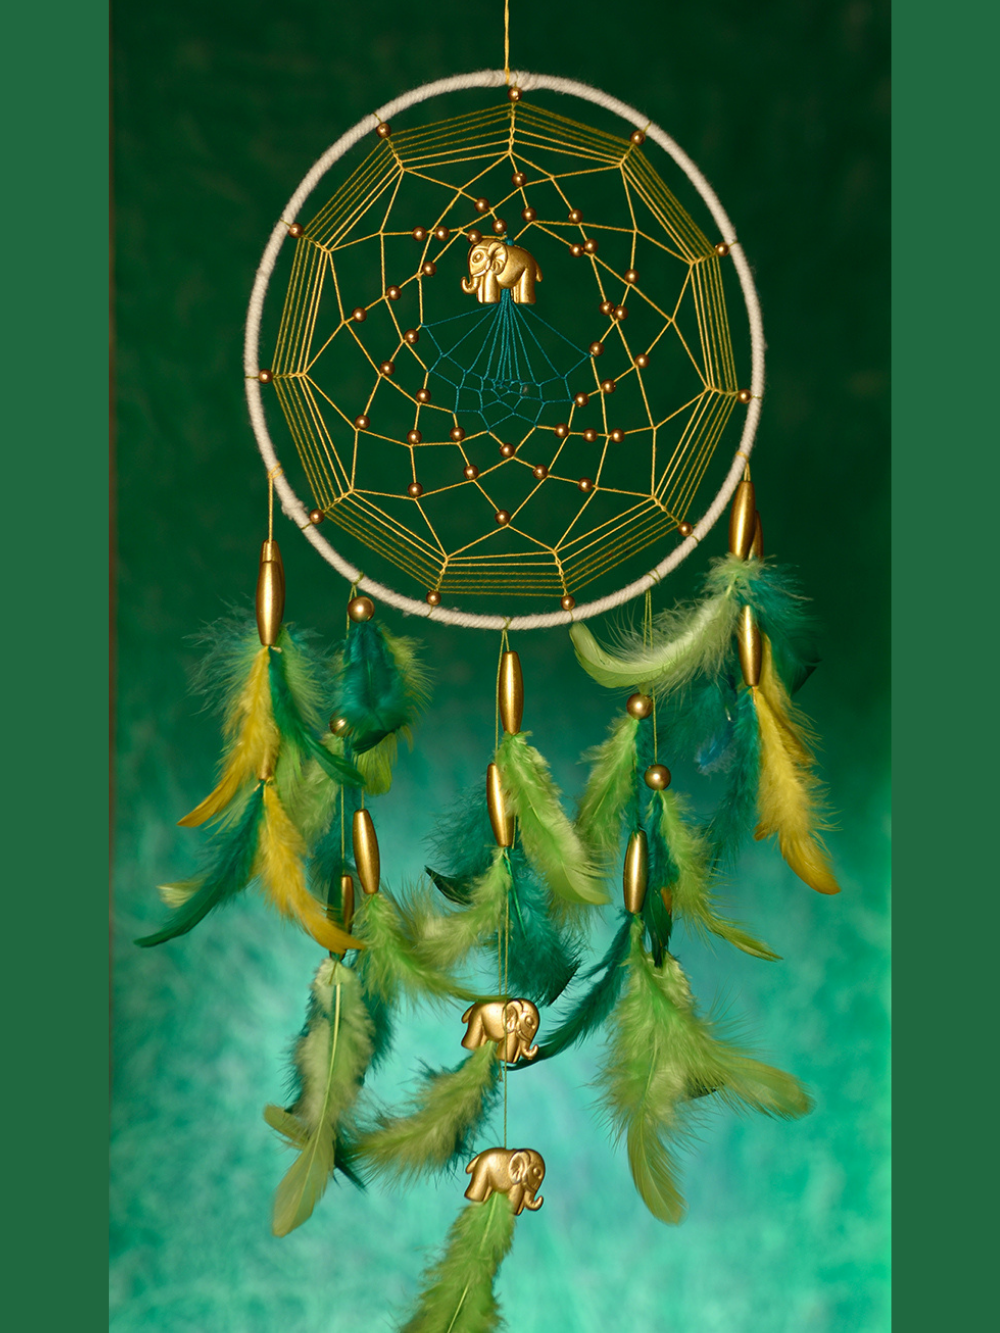 Green & Yellow with Gold Elephants Dream Catcher with Pretty Lights